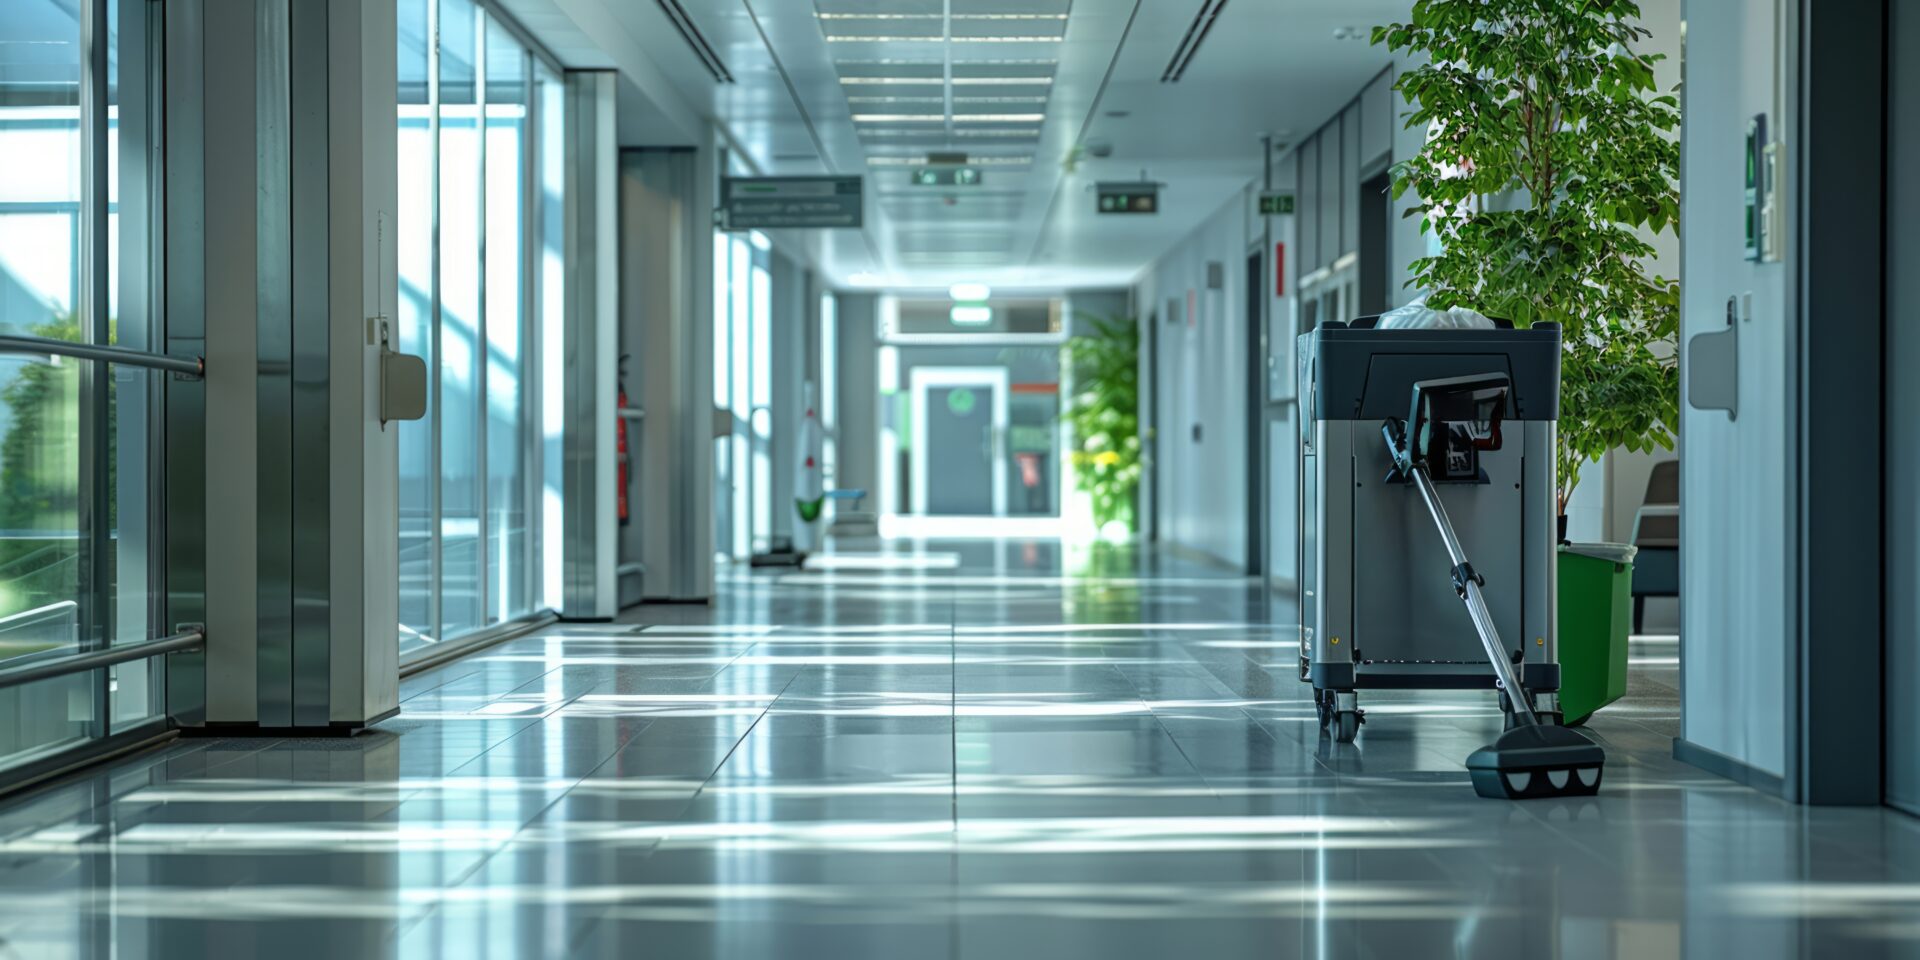 Smart cleaning using occupancy sensors in hospitals